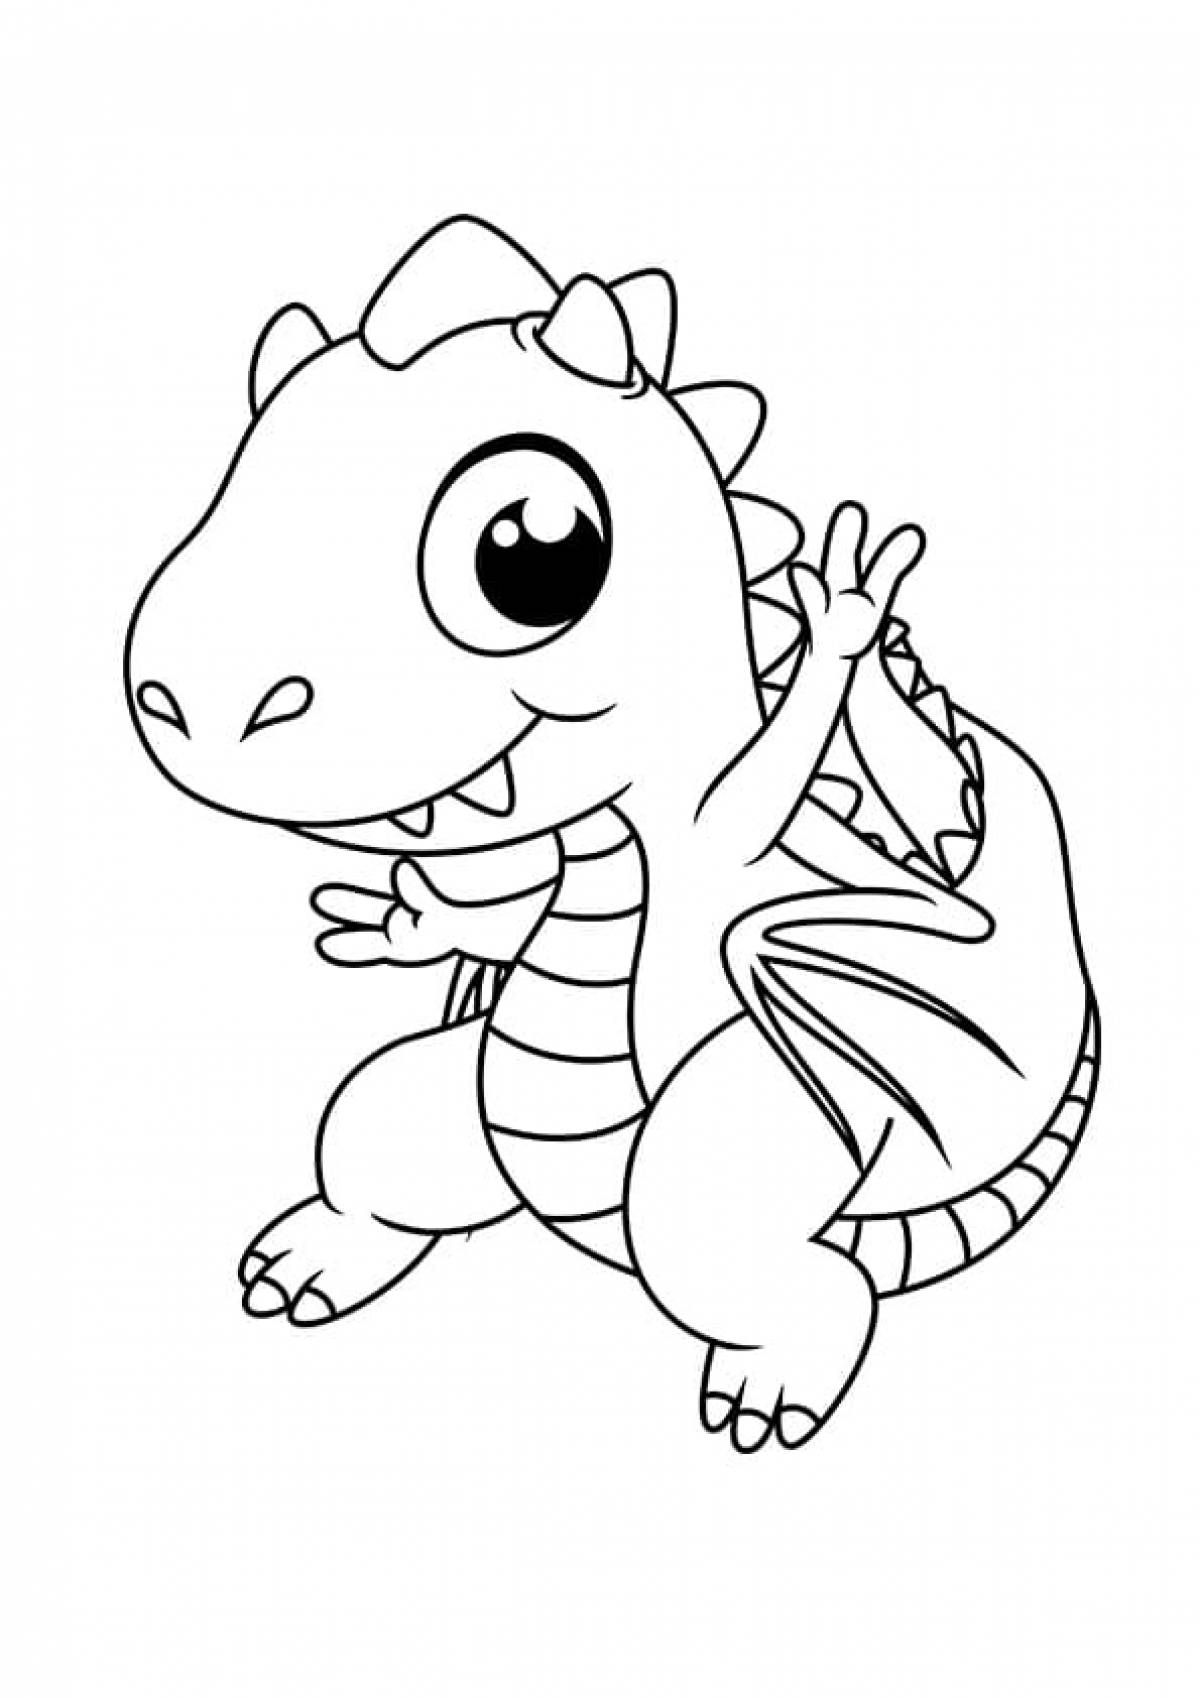 Wonderful coloring dragons for kids